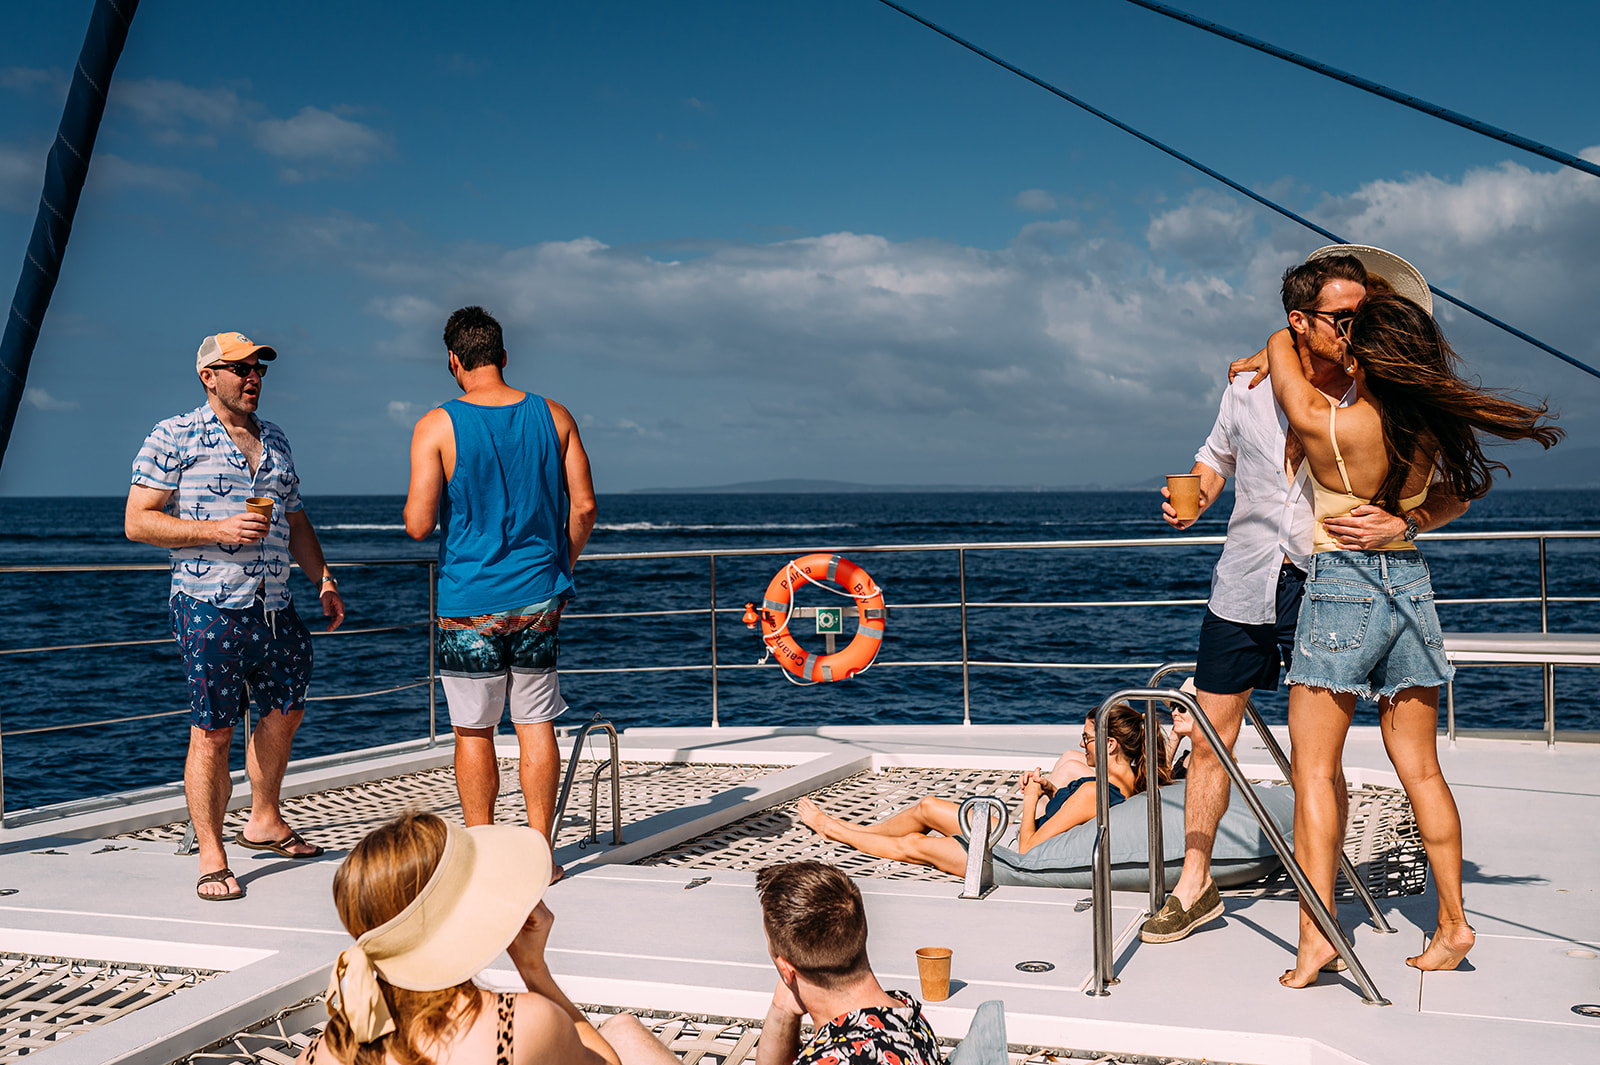 The couple and their friends on a boat party in Mallorca